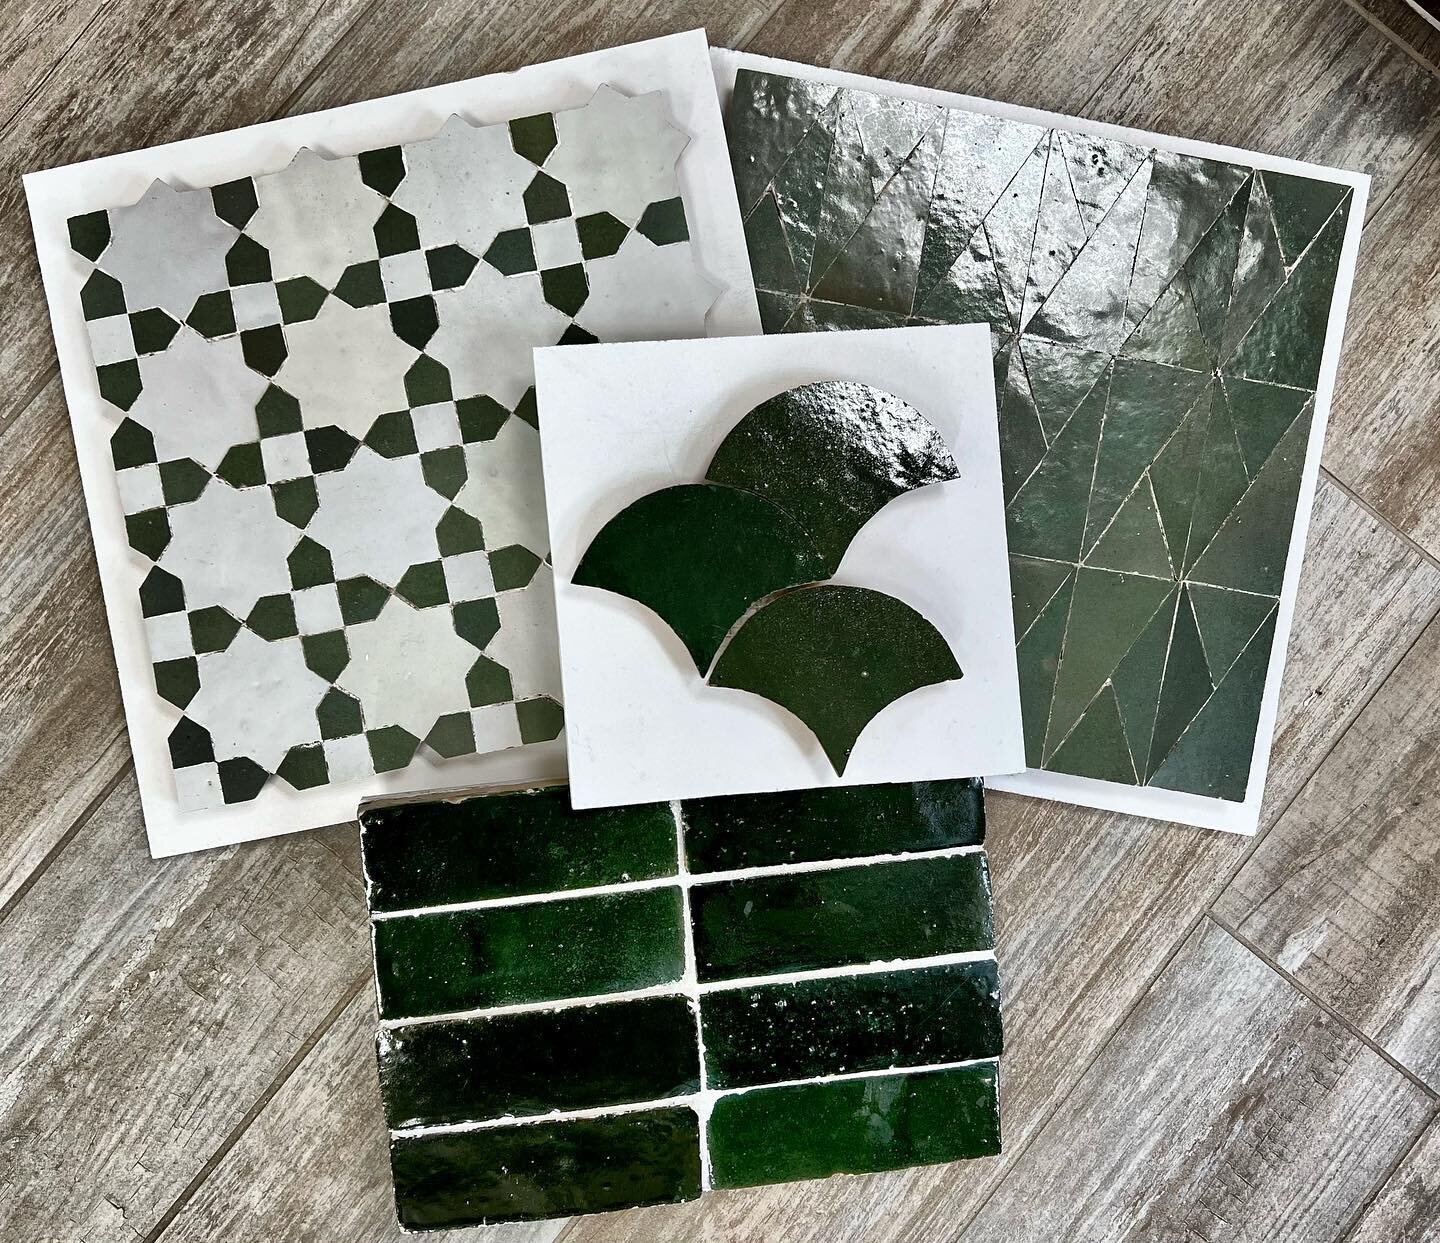 Green with envy 💚💚💚
✨✨Zellige Alert✨✨
Our new authentic Zellige line is here! Every color of the 🌈 you can imagine in 4x4 and 2x6 options along with some stunning mosaics.  A MUST see! Call for an appointment today. 
.
.
.
.

#tileobsessed #desig